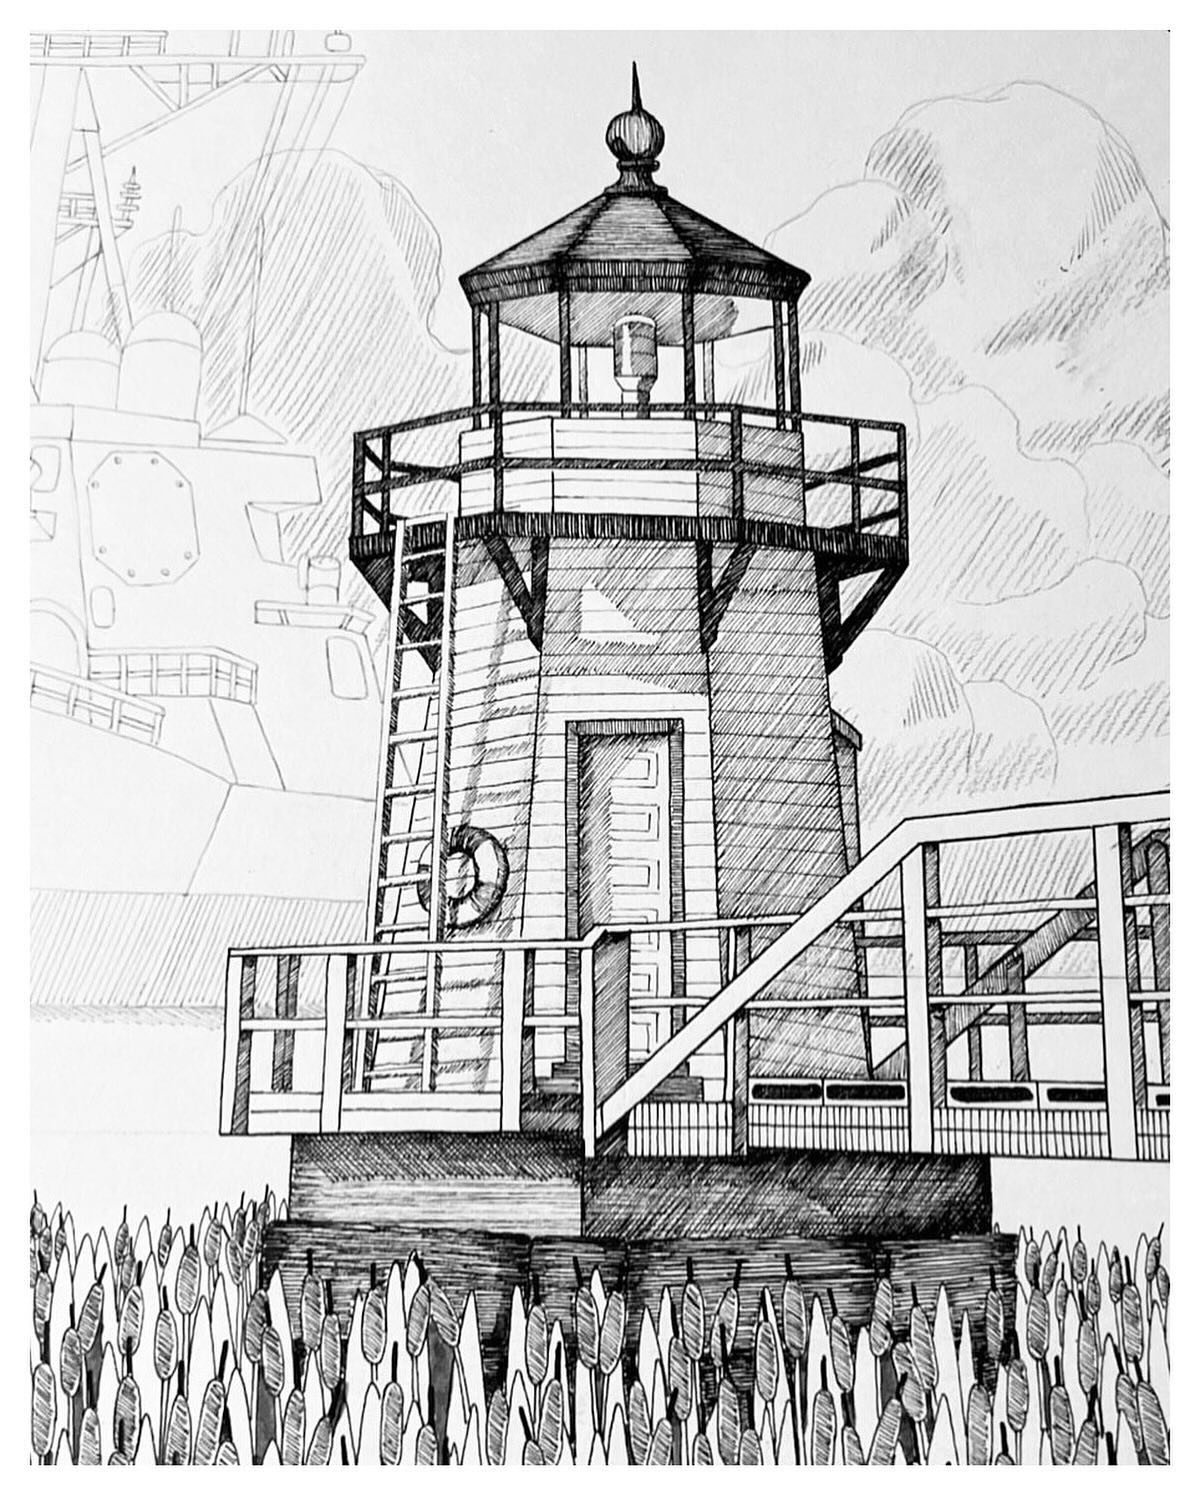 When I say deets I&rsquo;m talking about details and cattails. 
Close up of the Doubling Point Lighthouse drawing.

#tiarasaficmartinart #illustration #illustrationnow #art #artoftheday #artofinstagram #artistsoninstagram #blackwork #blackandwhite #p